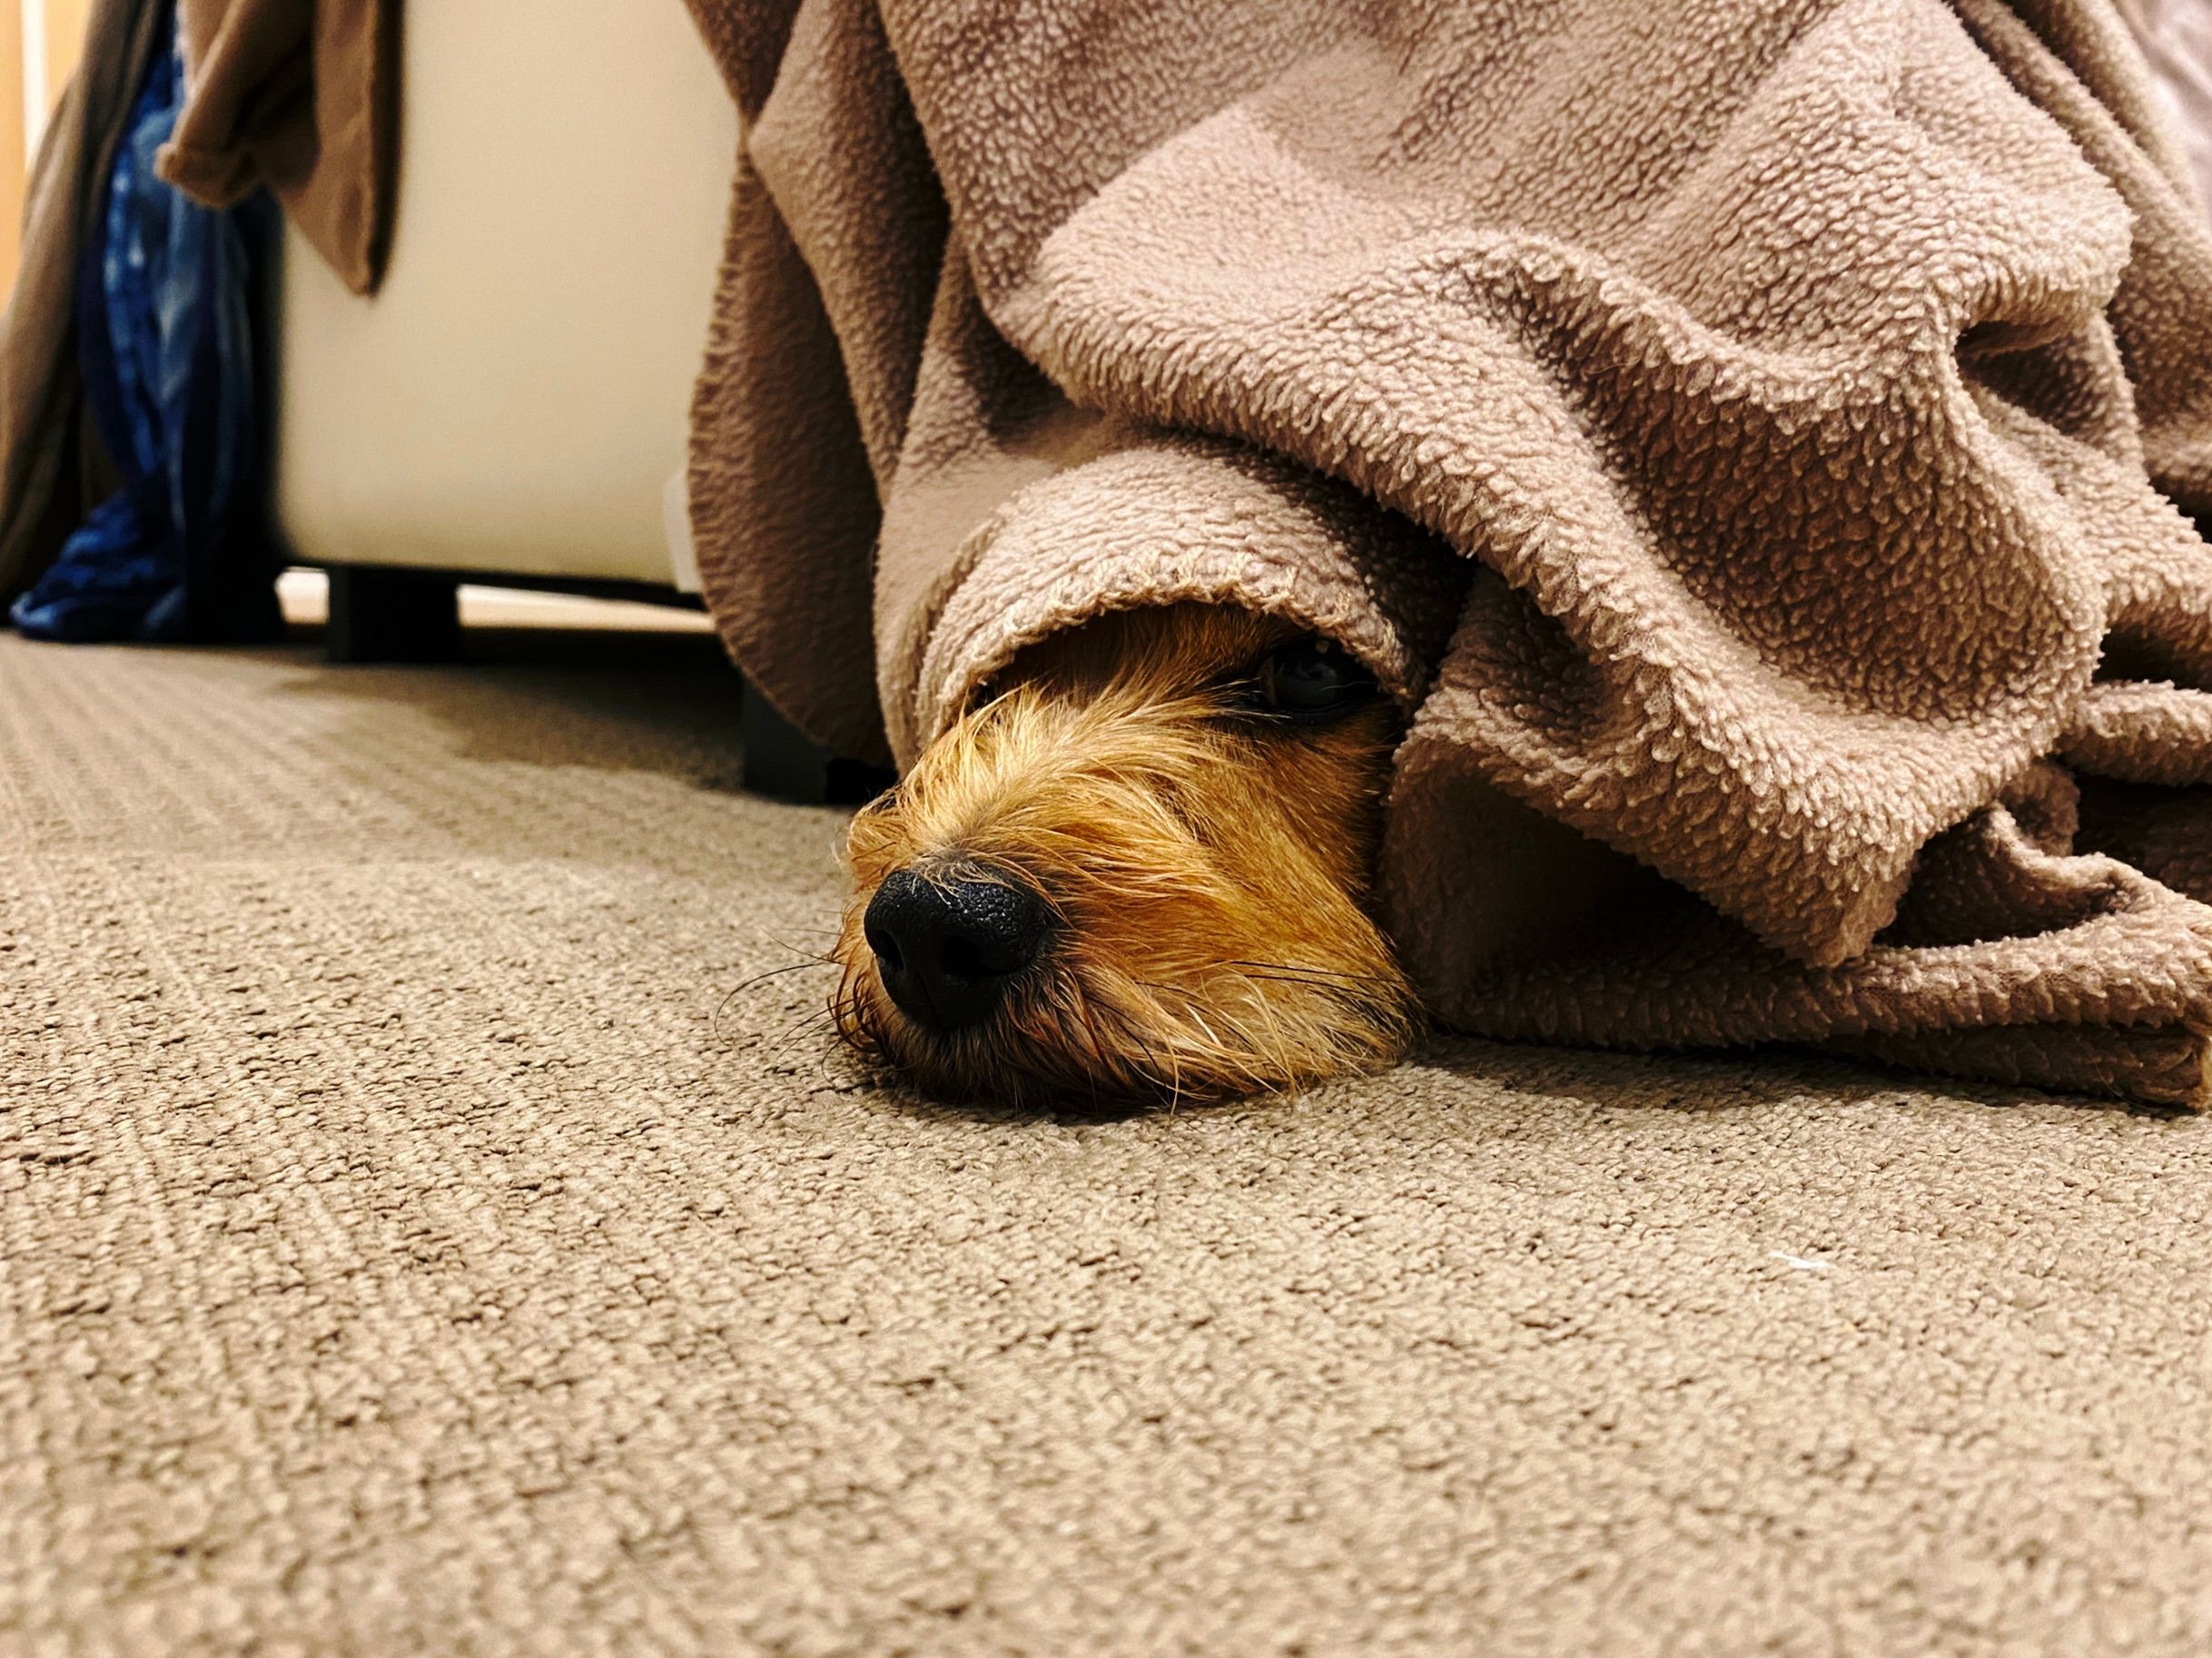 A photo of a small scruffy dog lying on the floor with just his snout and part of one eye poking out from underneath a brown blanket that's hanging down from our bed.